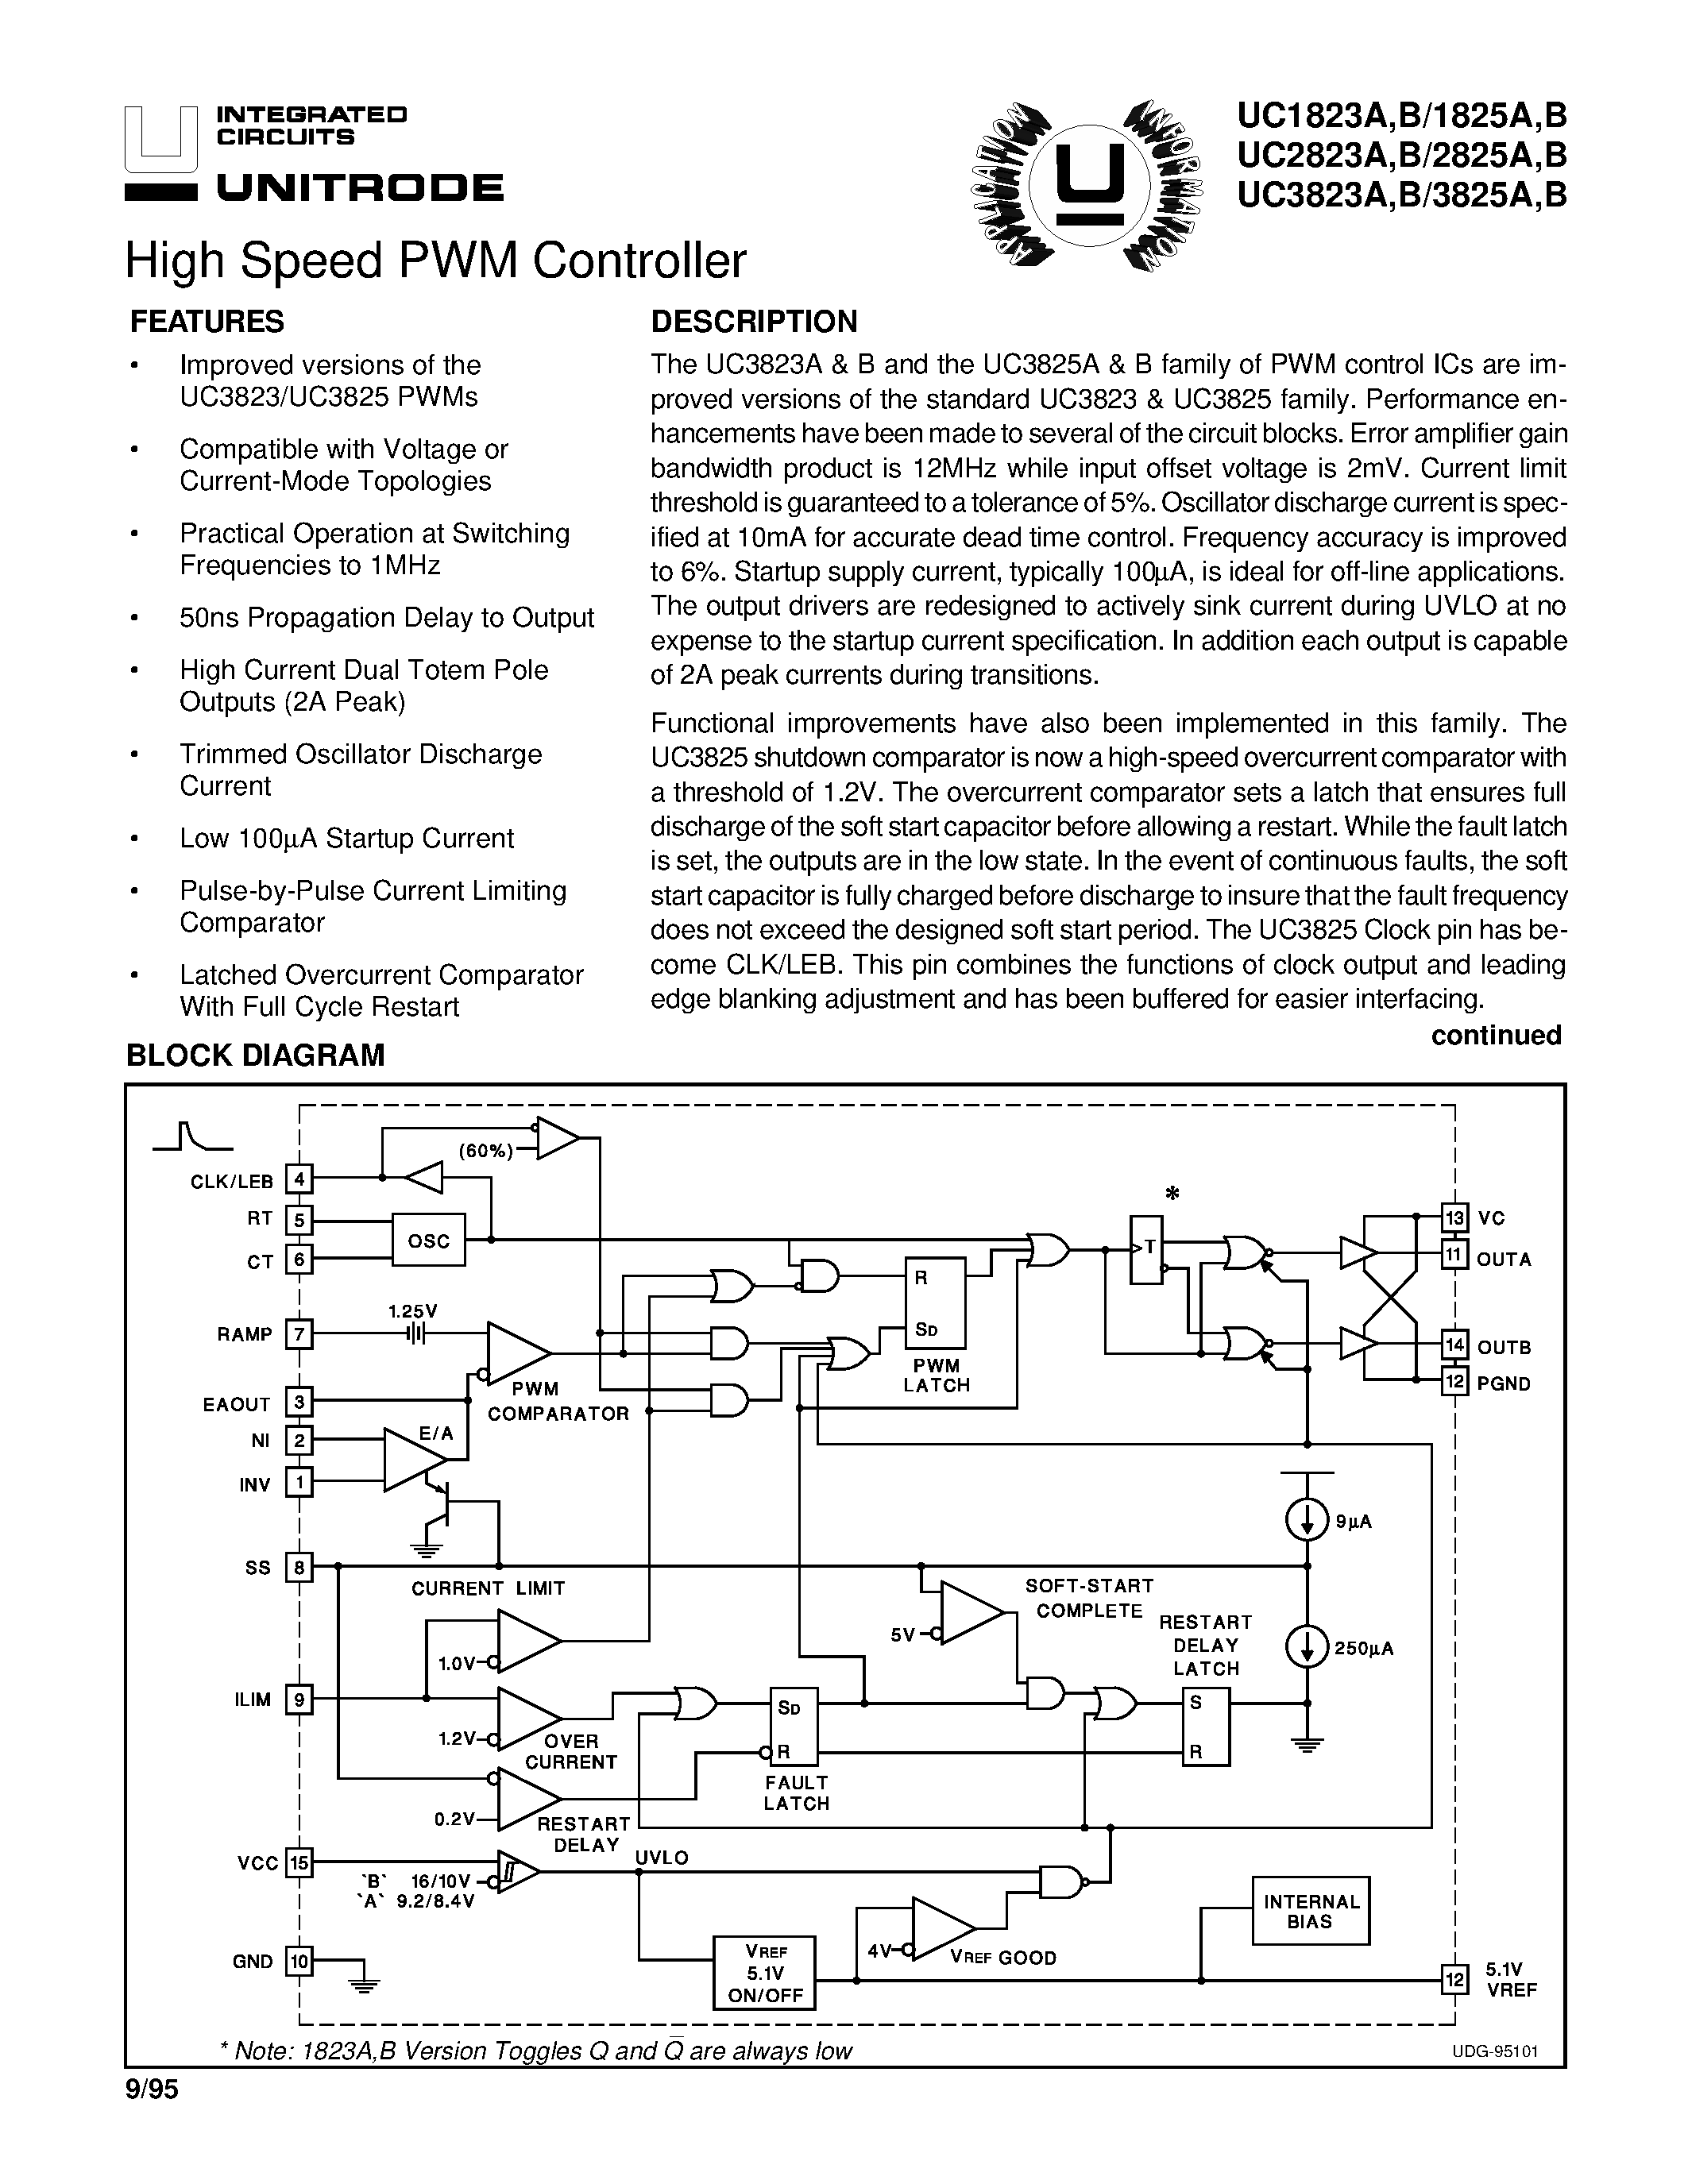 Datasheet UC2823A - High Speed PWM Controller page 1